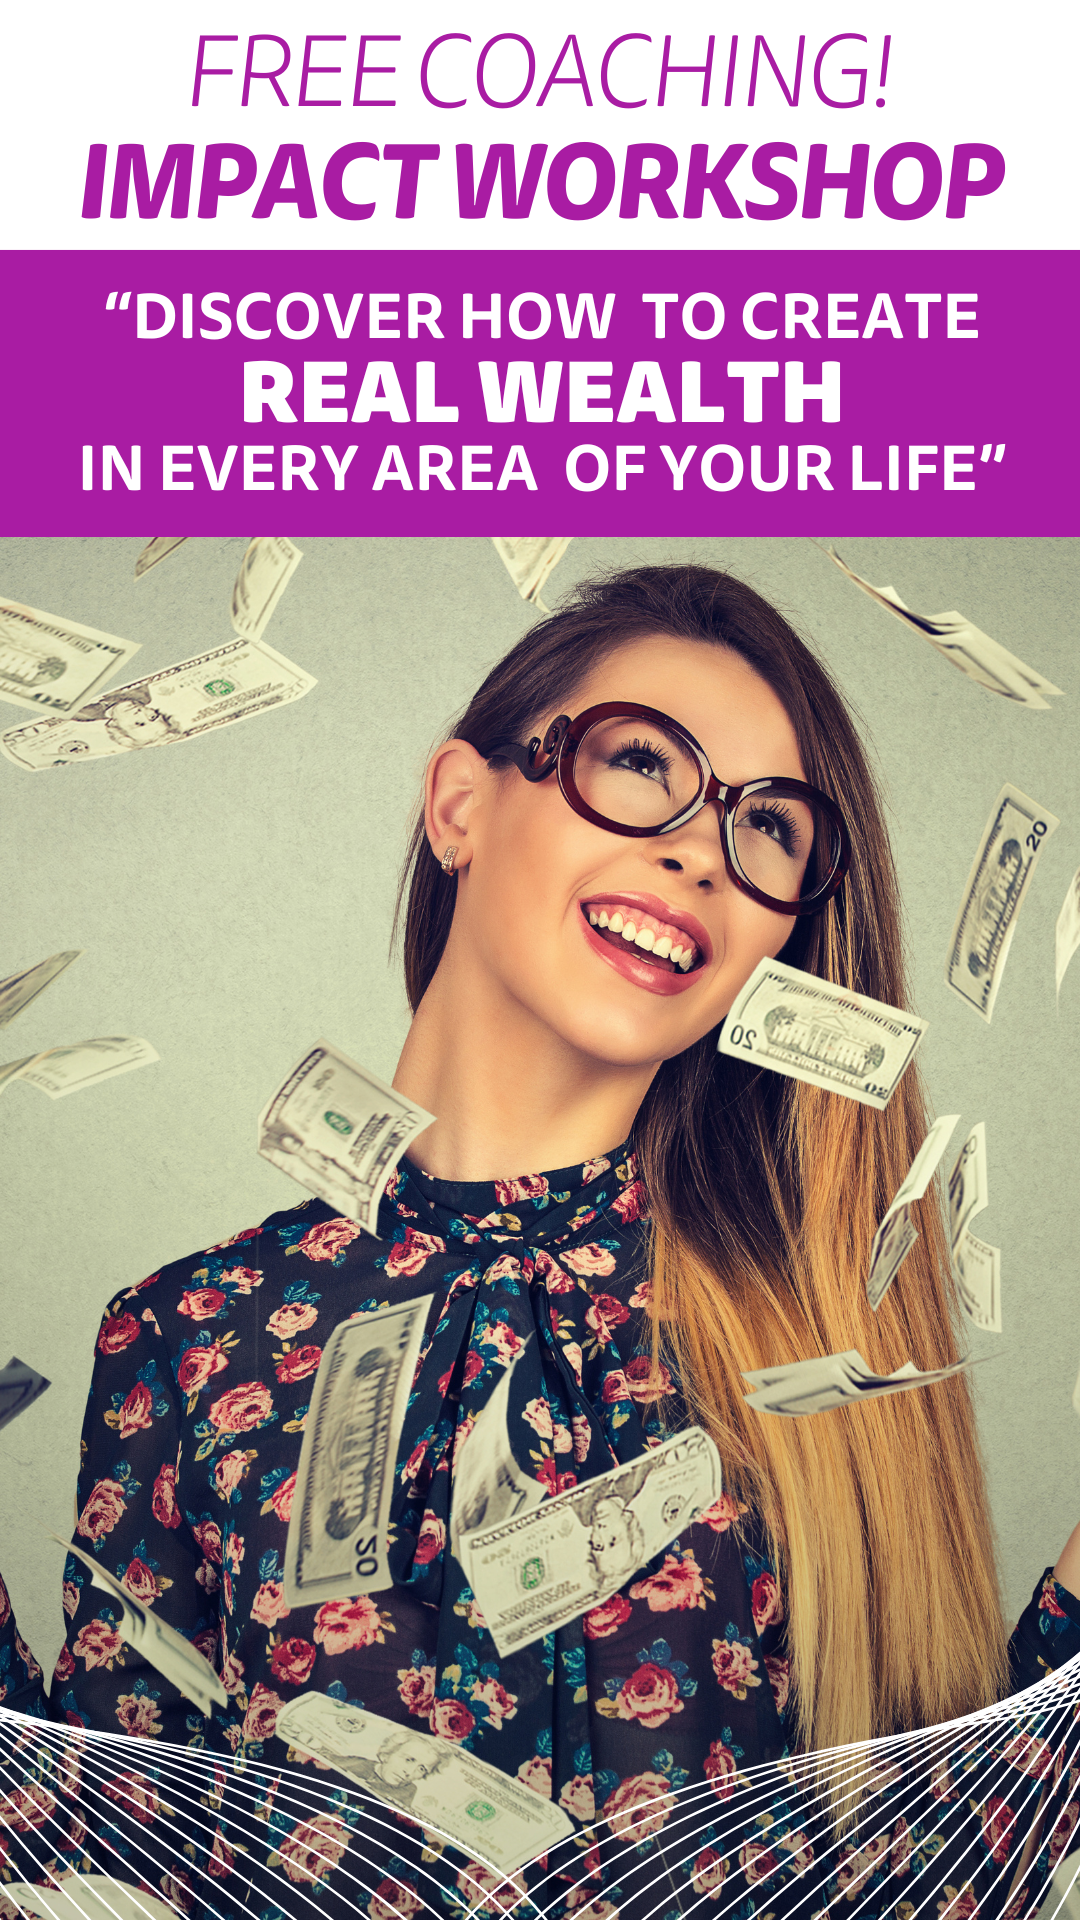 Free IMPACT money & life coaching and training with Julie Murphy. The IMPACT workshop show you how to create real wealth in every area of your life.